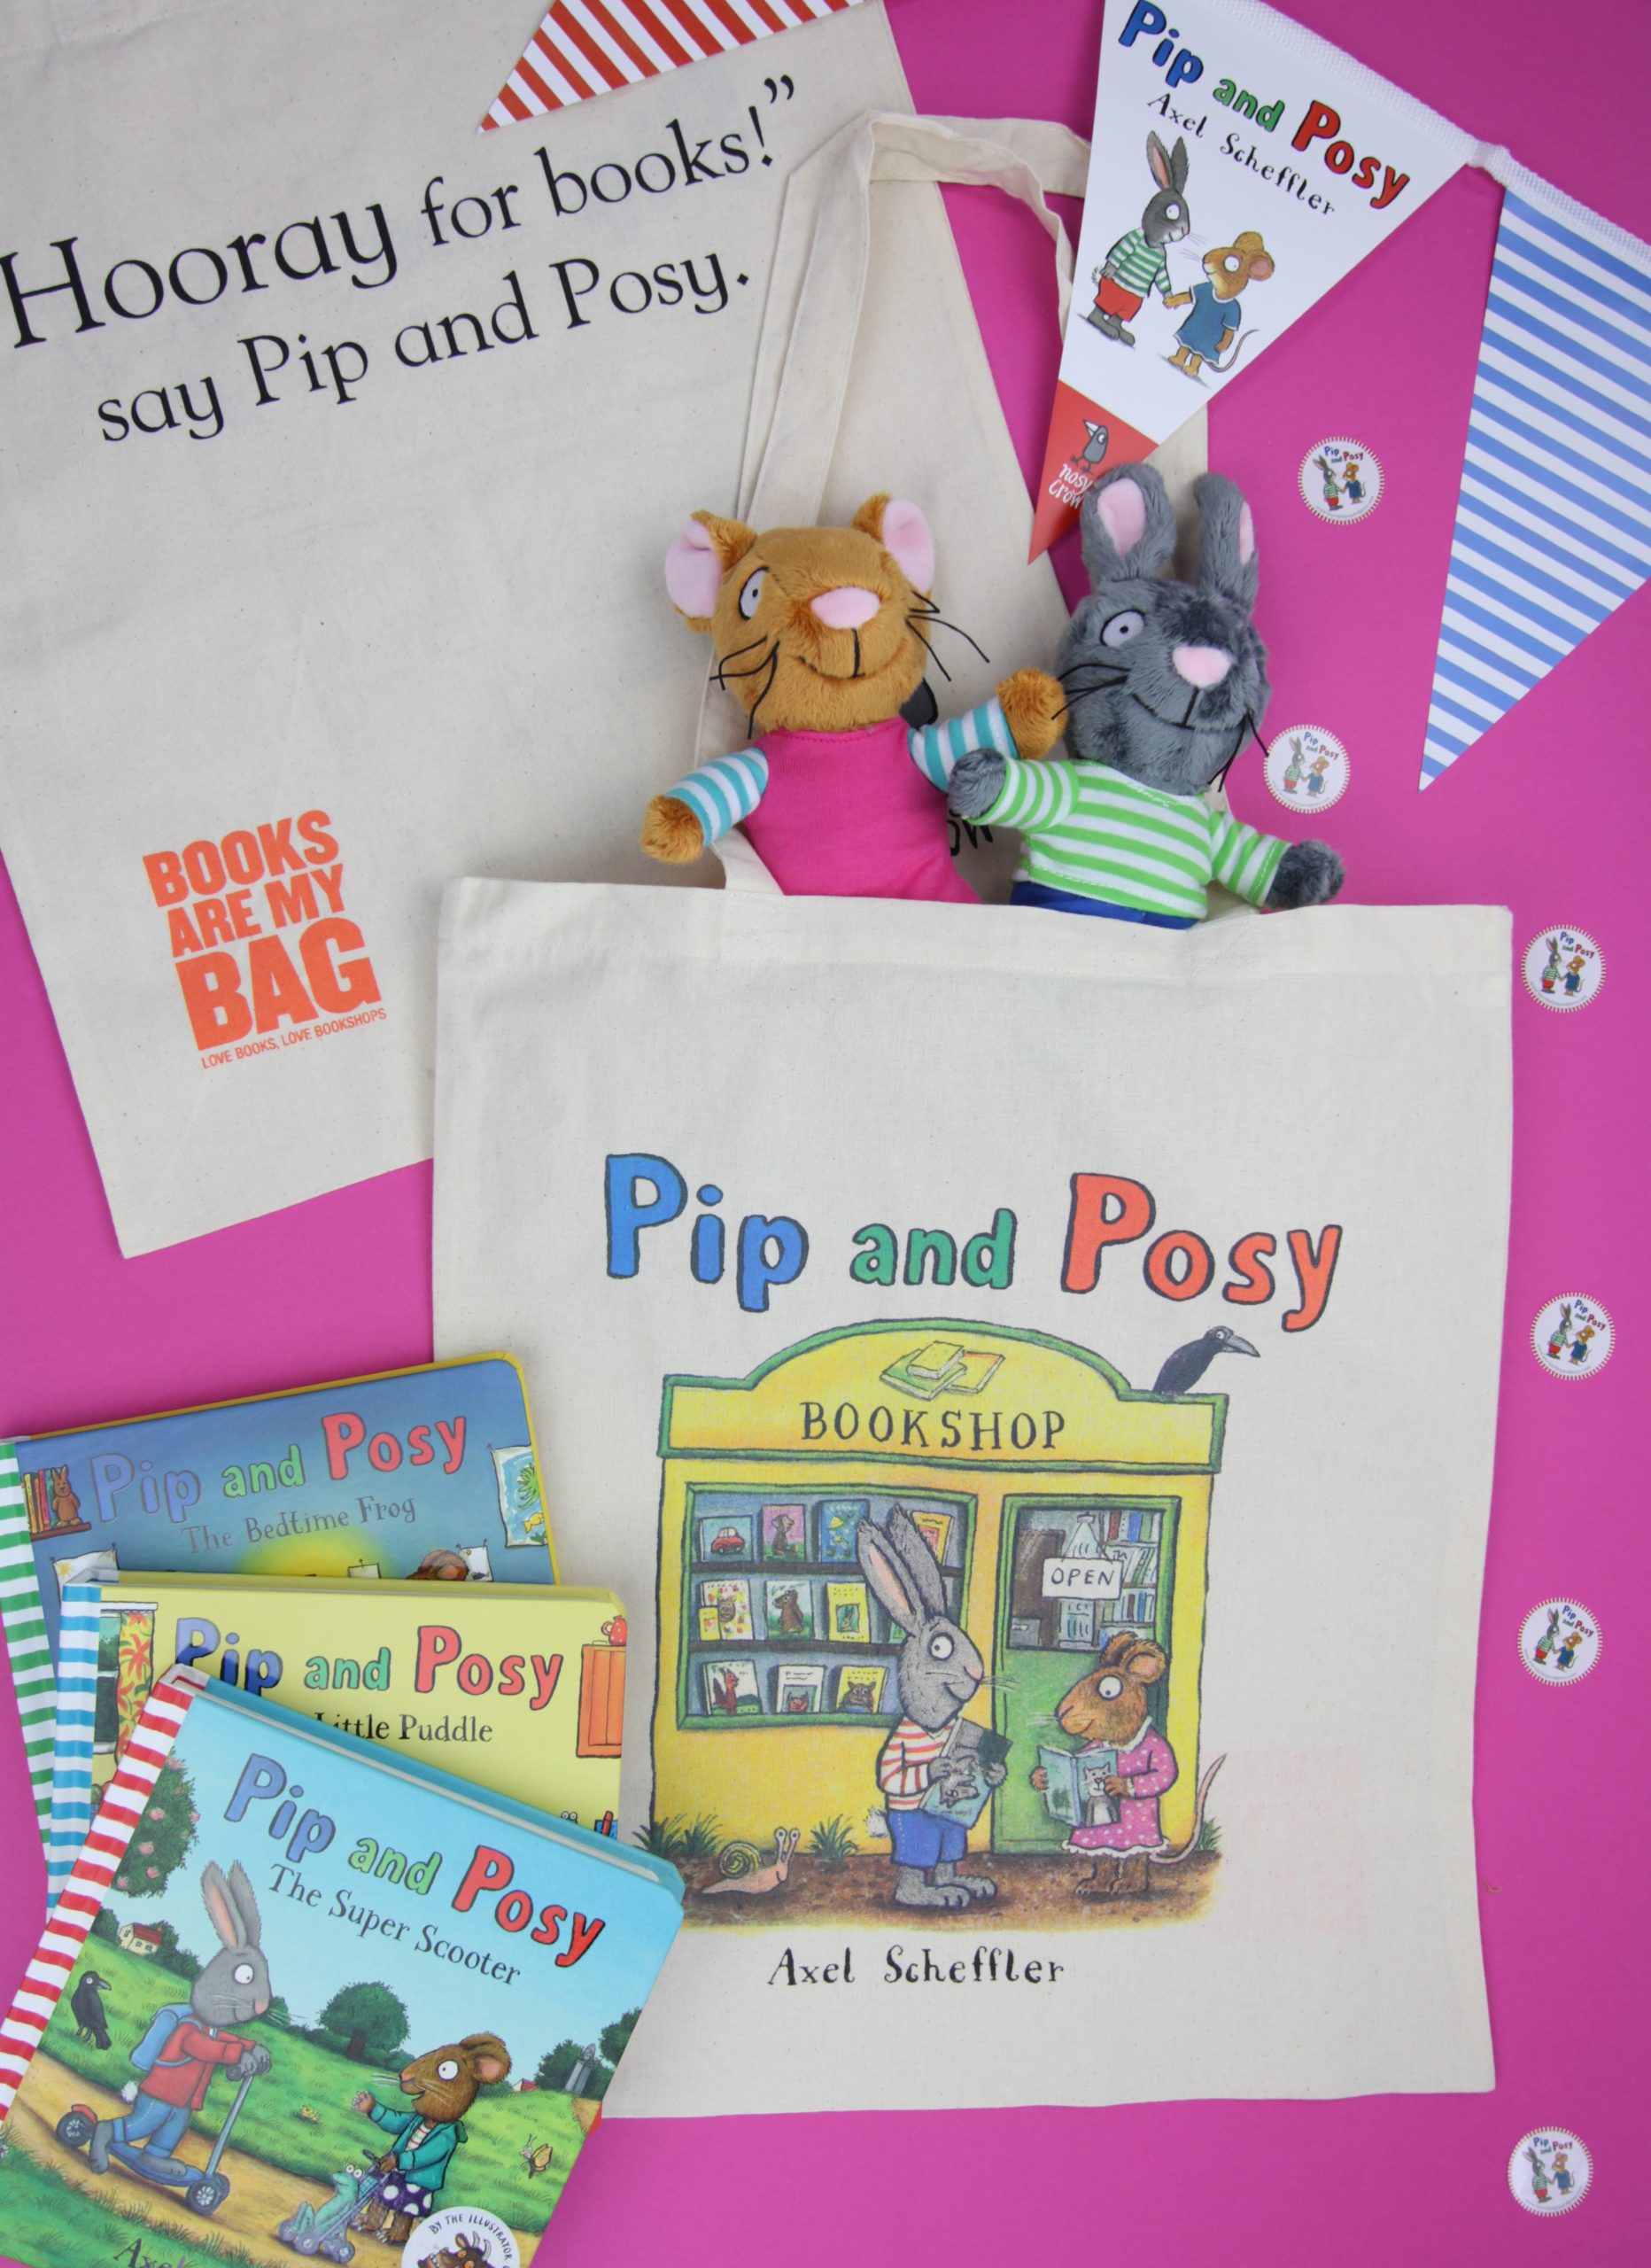 Pip and Posy - Books are my Bag